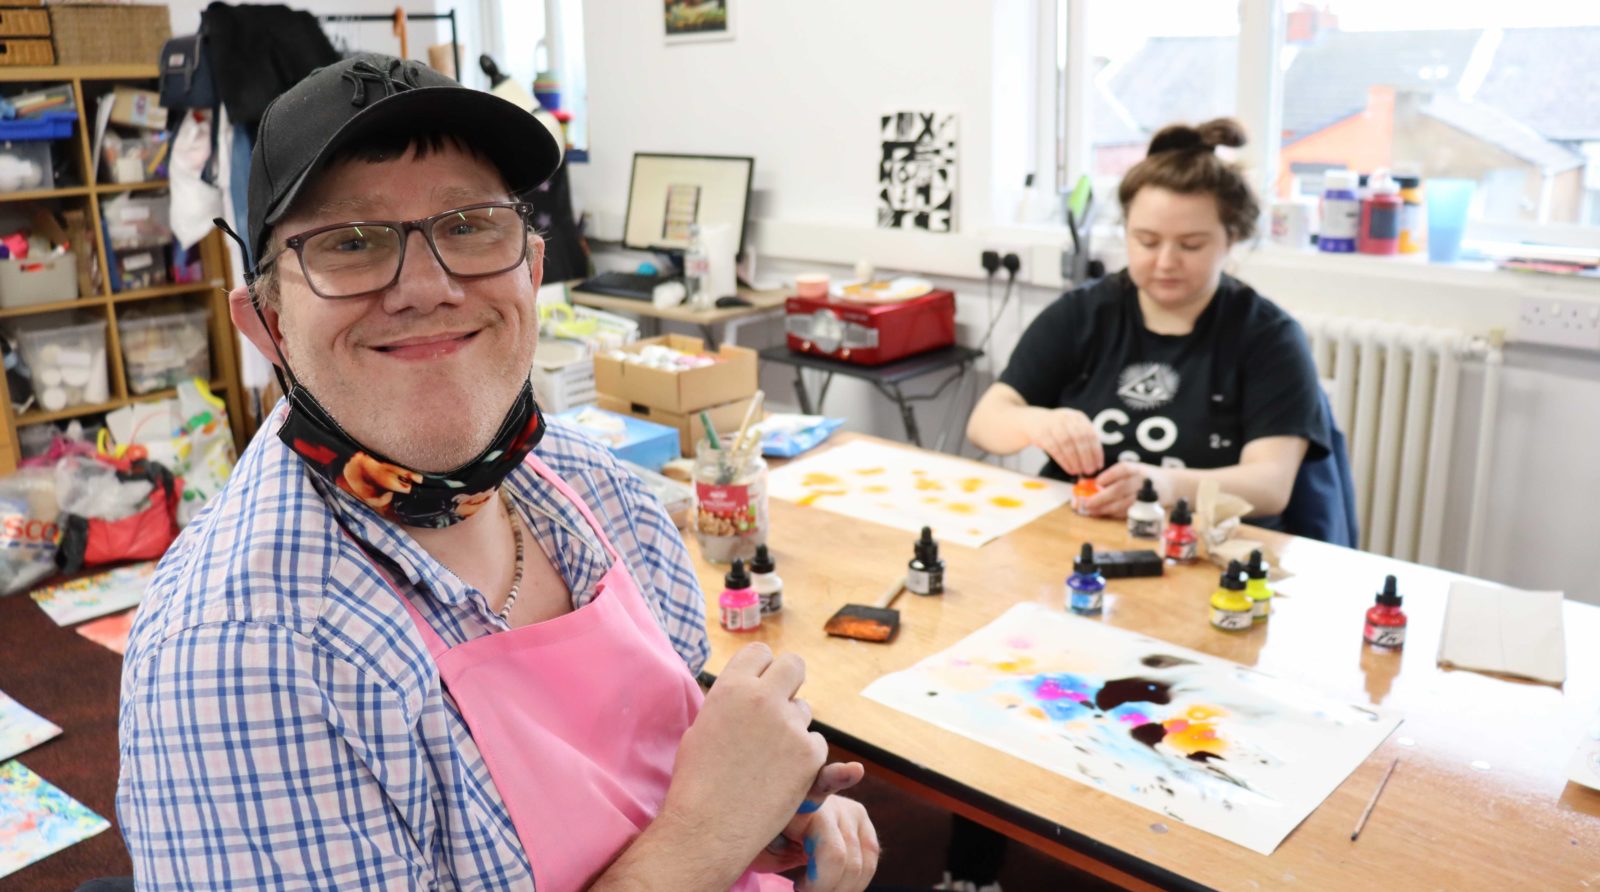 2 buzz hub members participate in the workshop, one is smiling at the camera and the other is working in the background, they are using inks to create marbling.